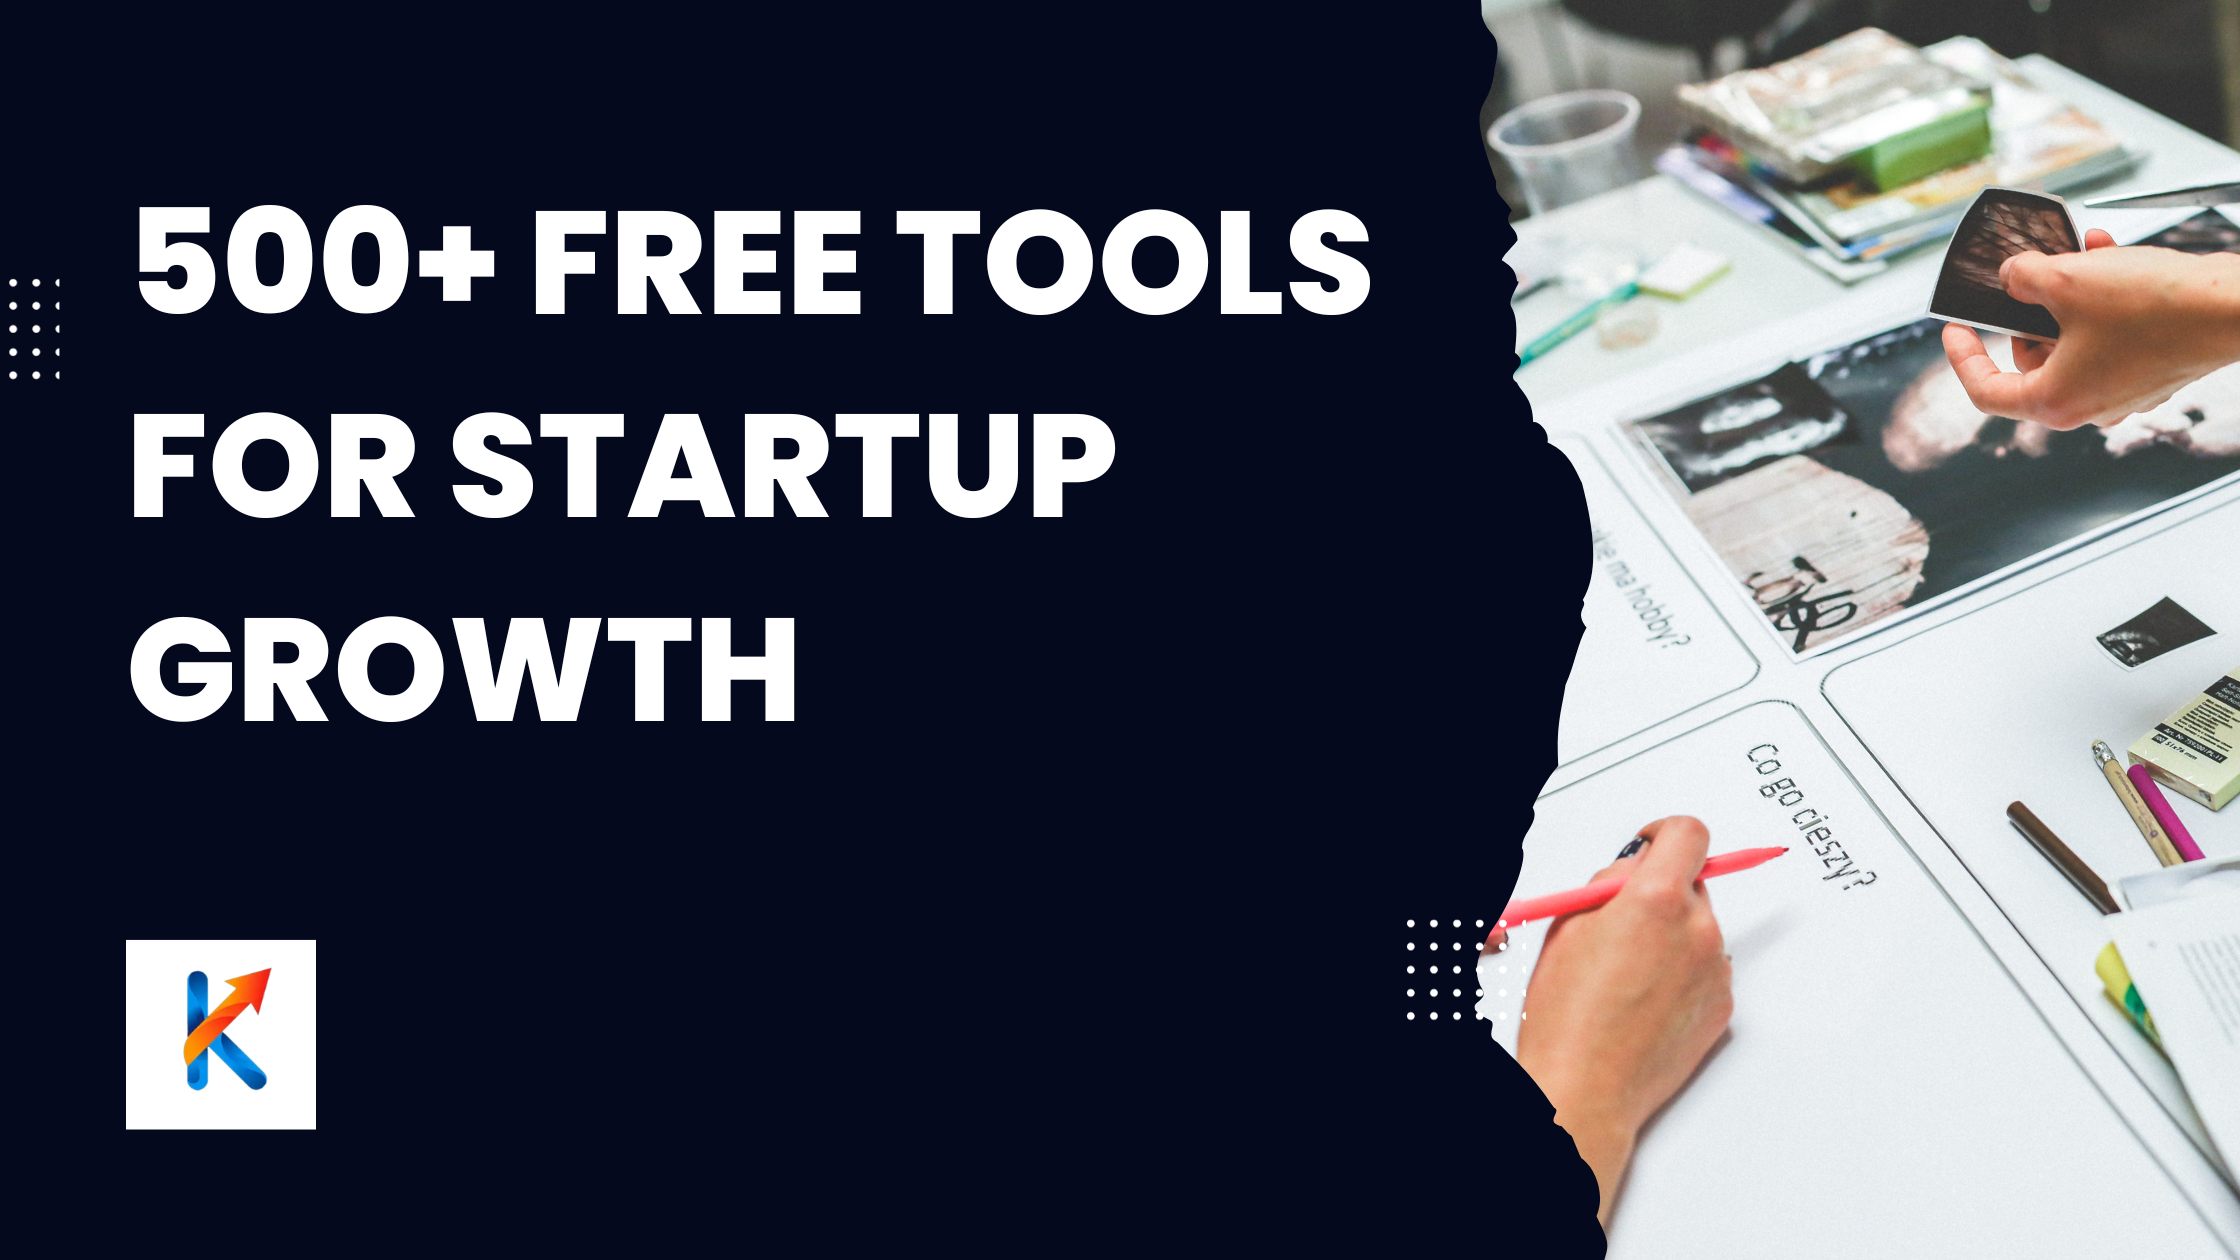 500+ Free Tools for Startup Growth